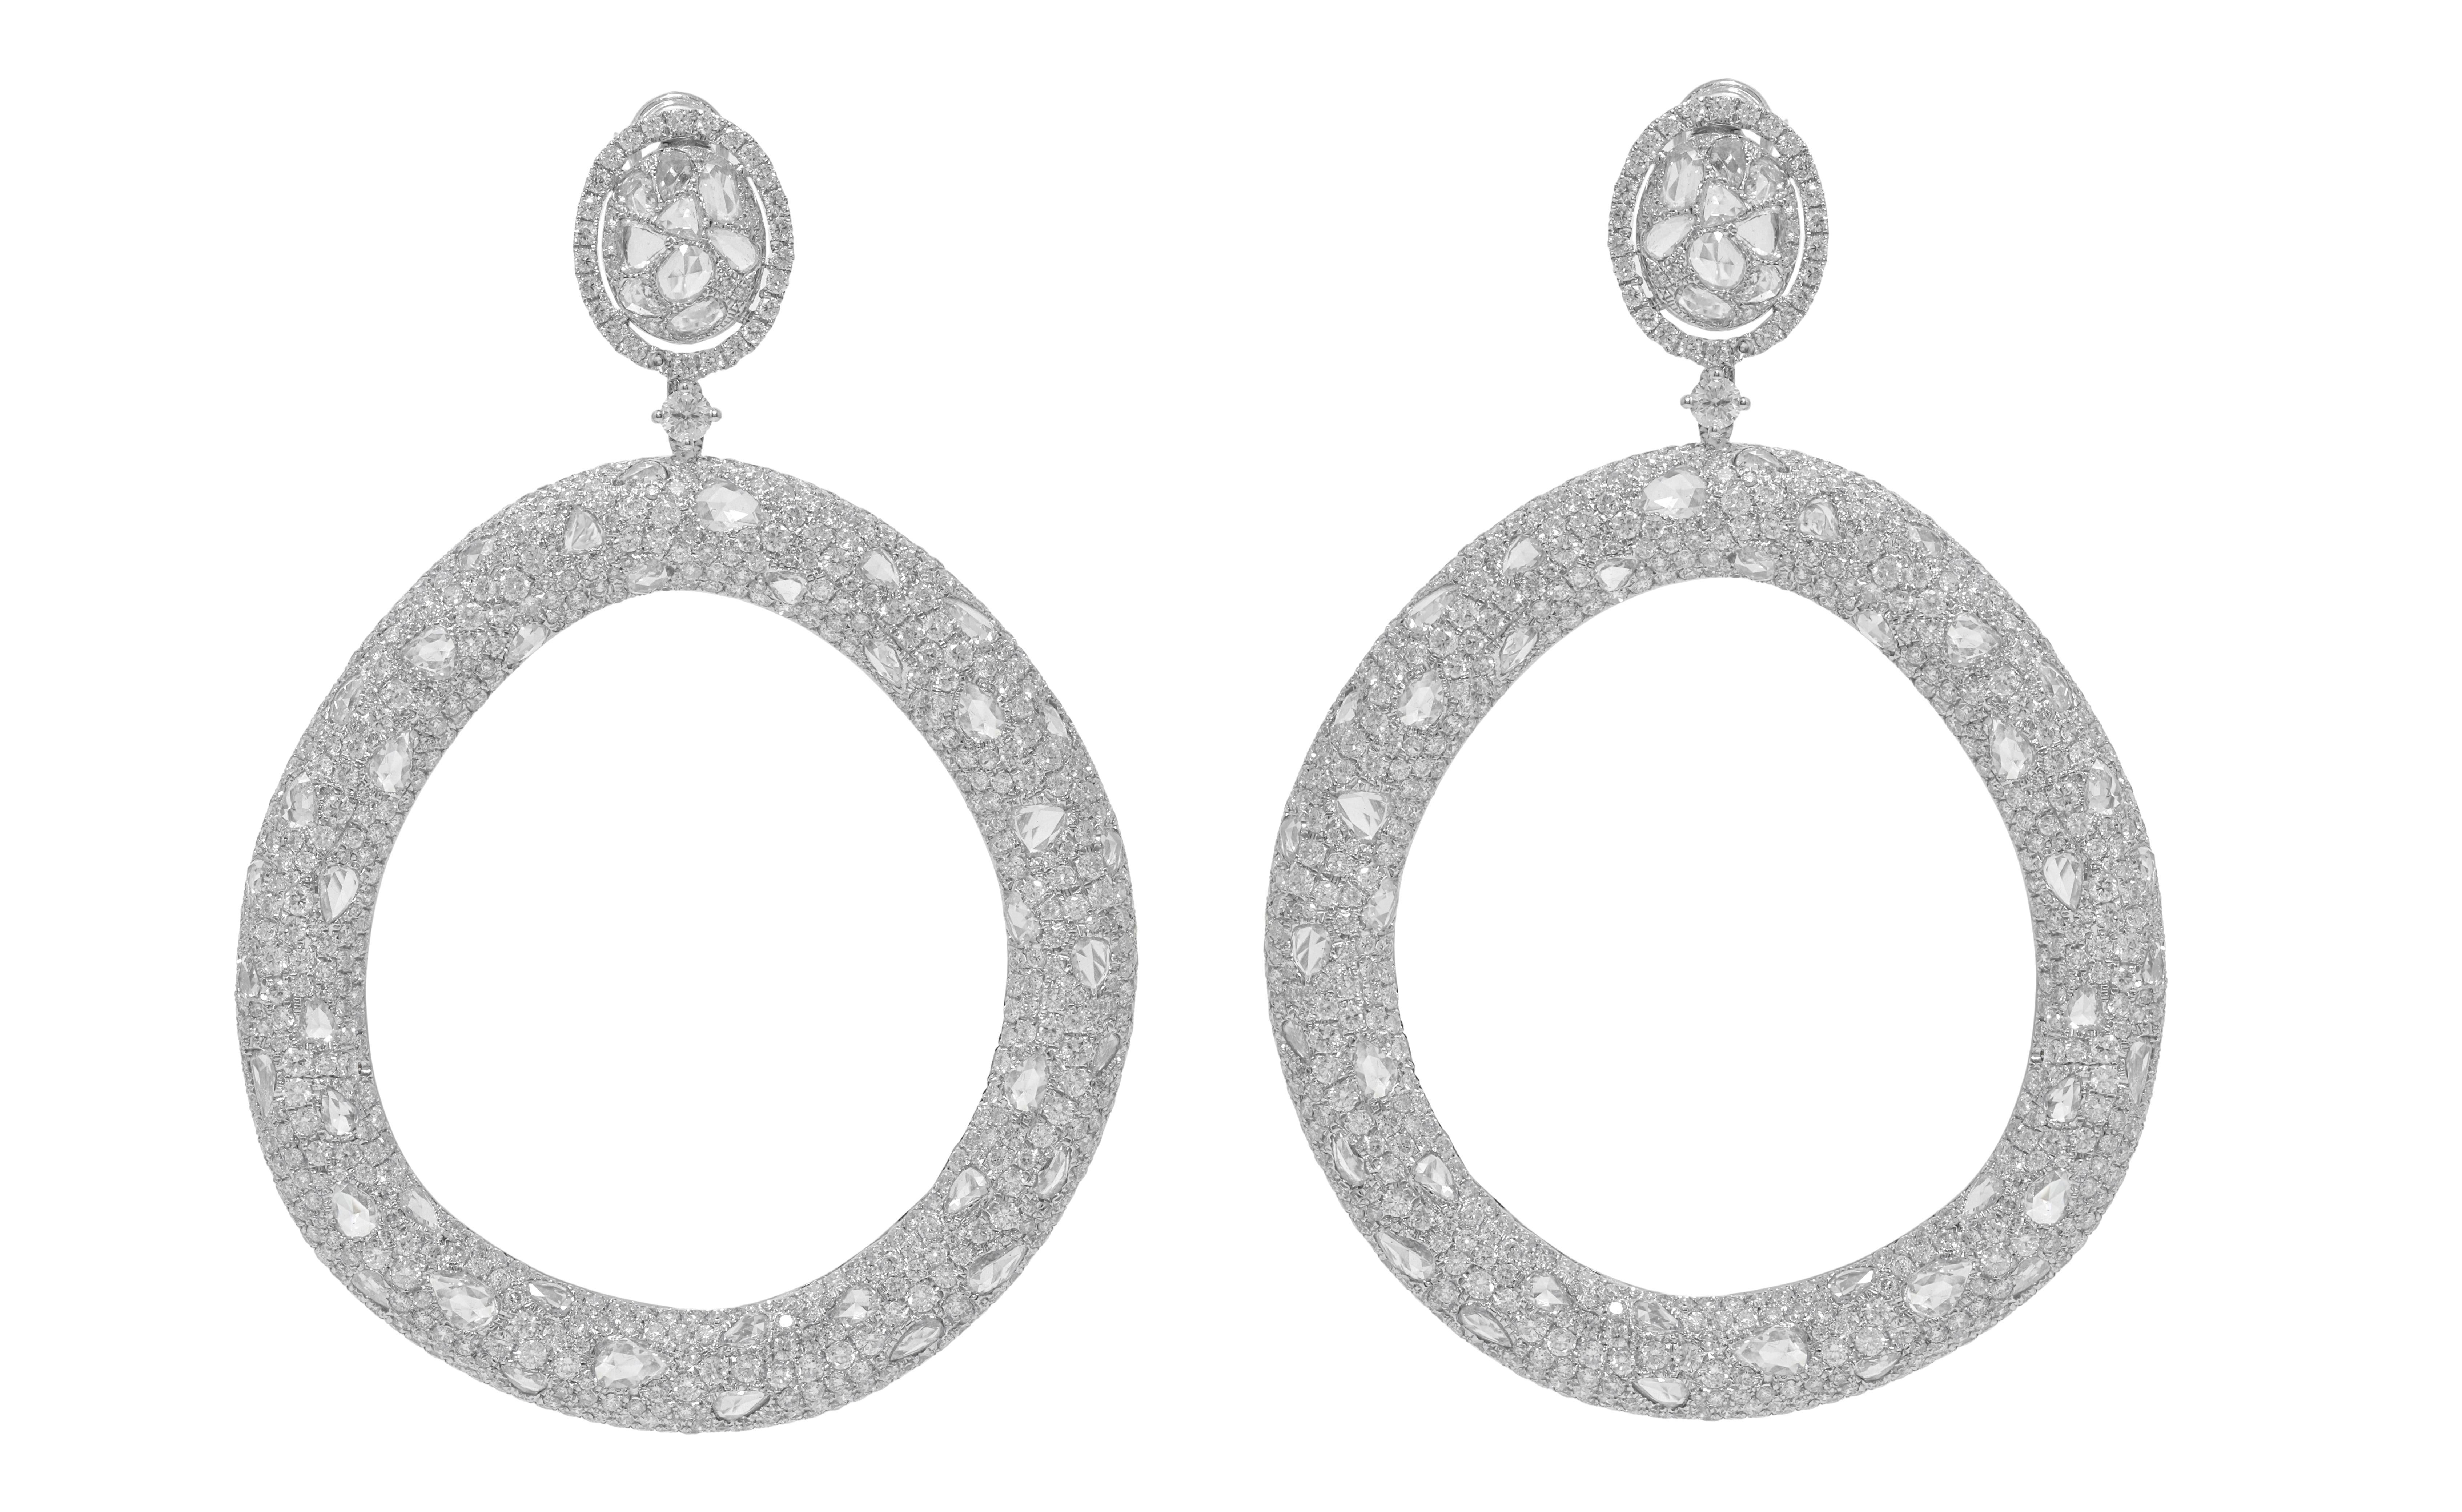 18 kt white gold bagel shaped fashion earrings adorned with 14.71 cts tw of diamonds of various shapes and sizes
Diana M. is a leading supplier of top-quality fine jewelry for over 35 years.
Diana M is one-stop shop for all your jewelry shopping,